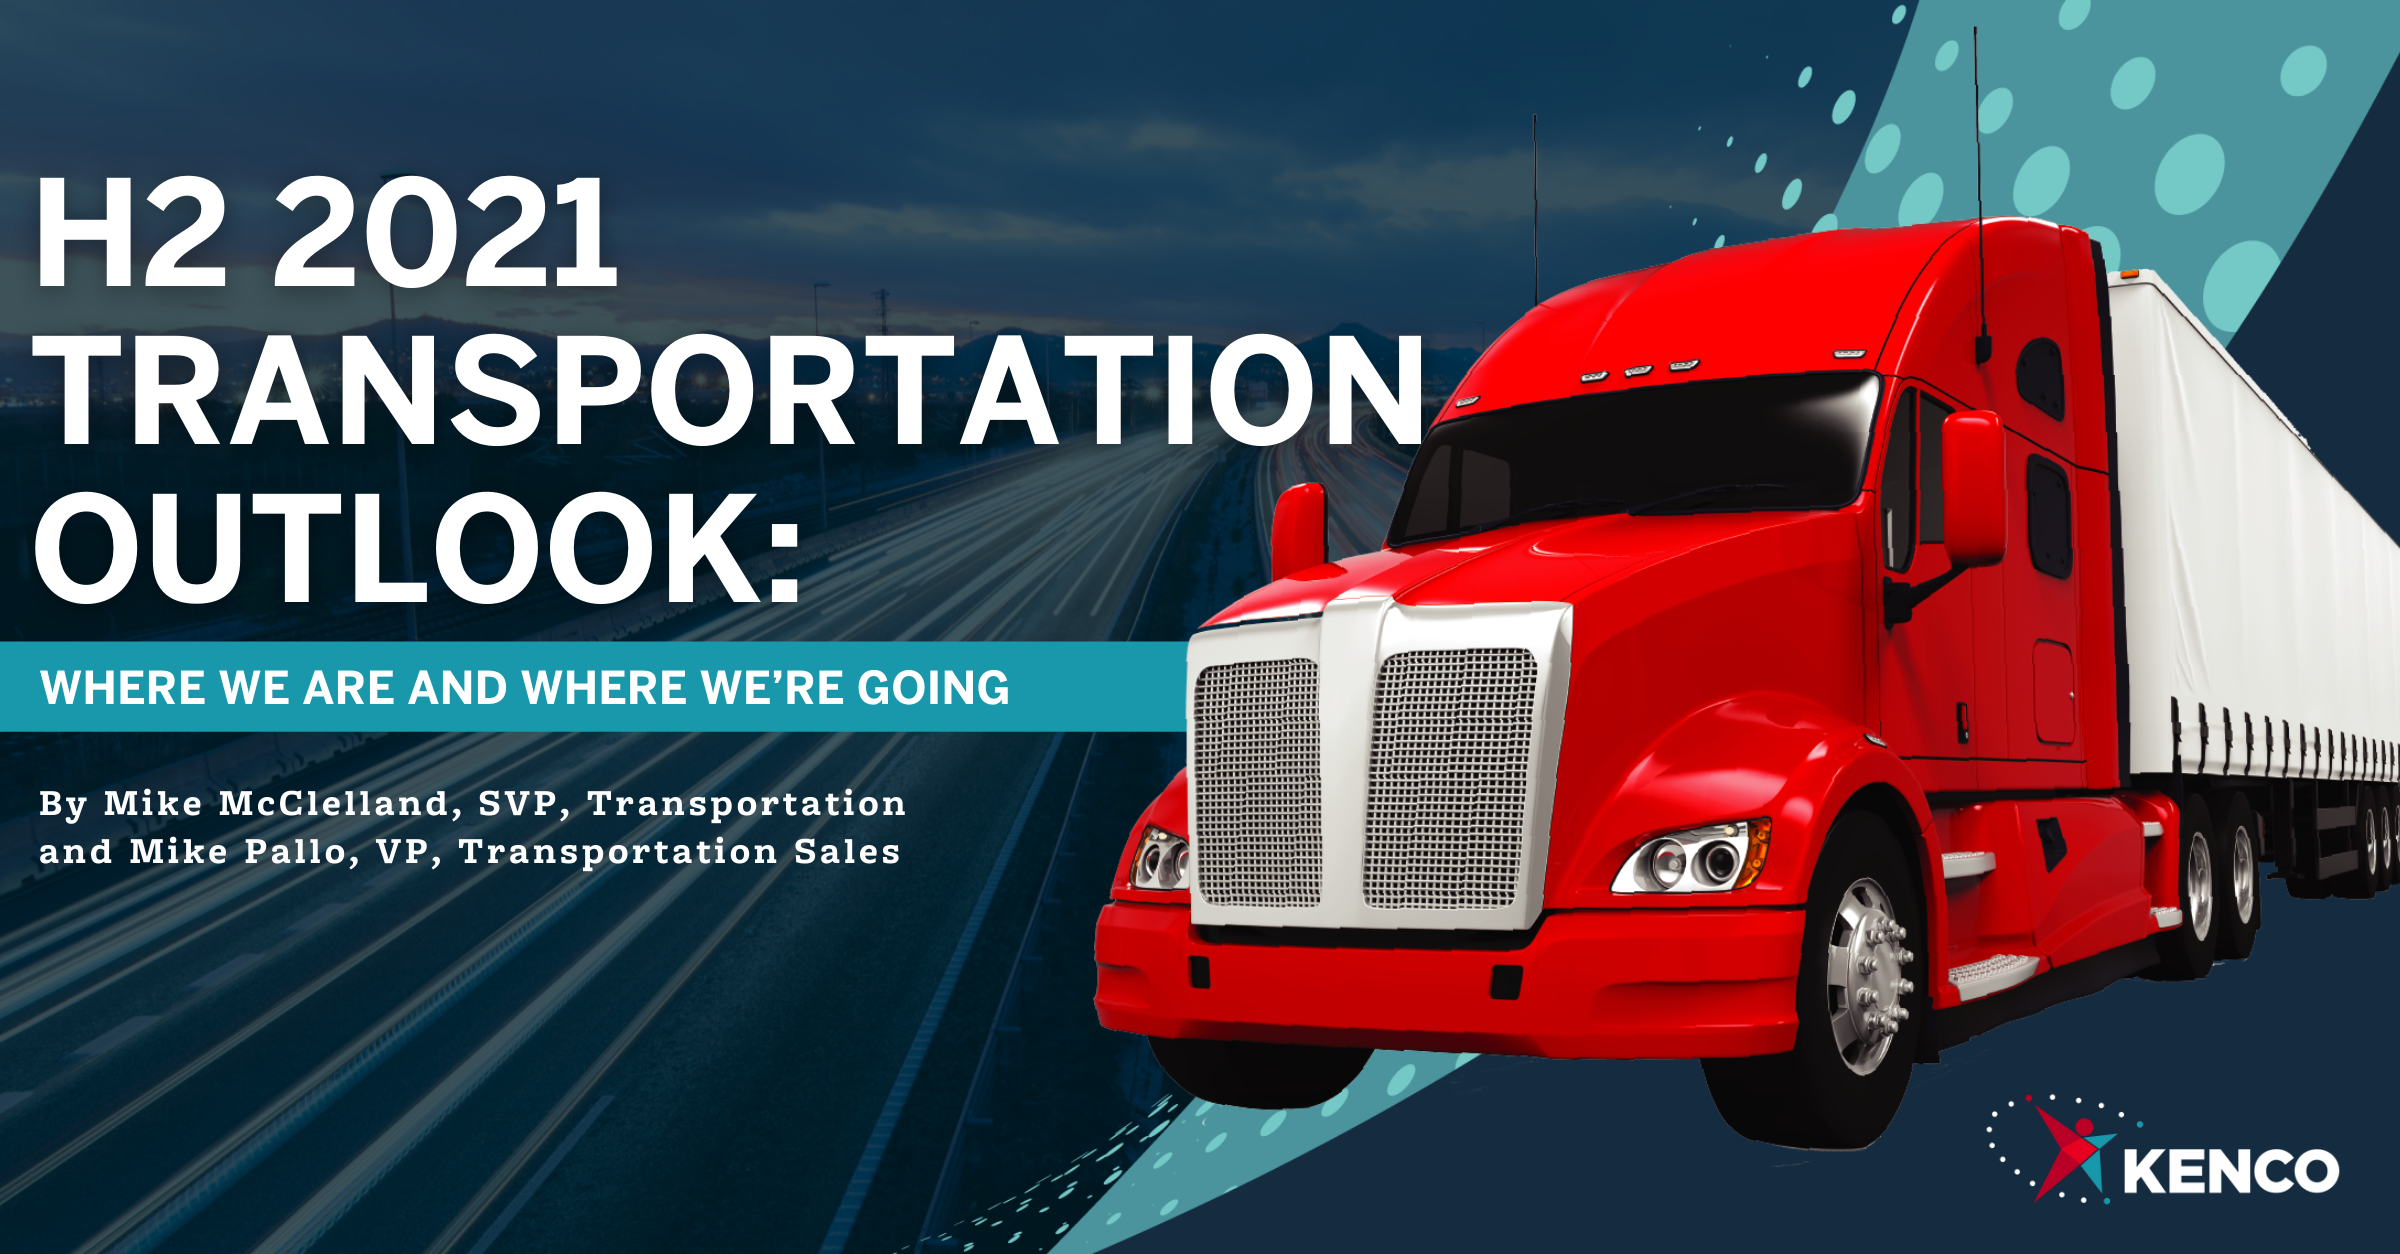 H2 2021 Transportation Outlook Where We Are and Where We’re Going